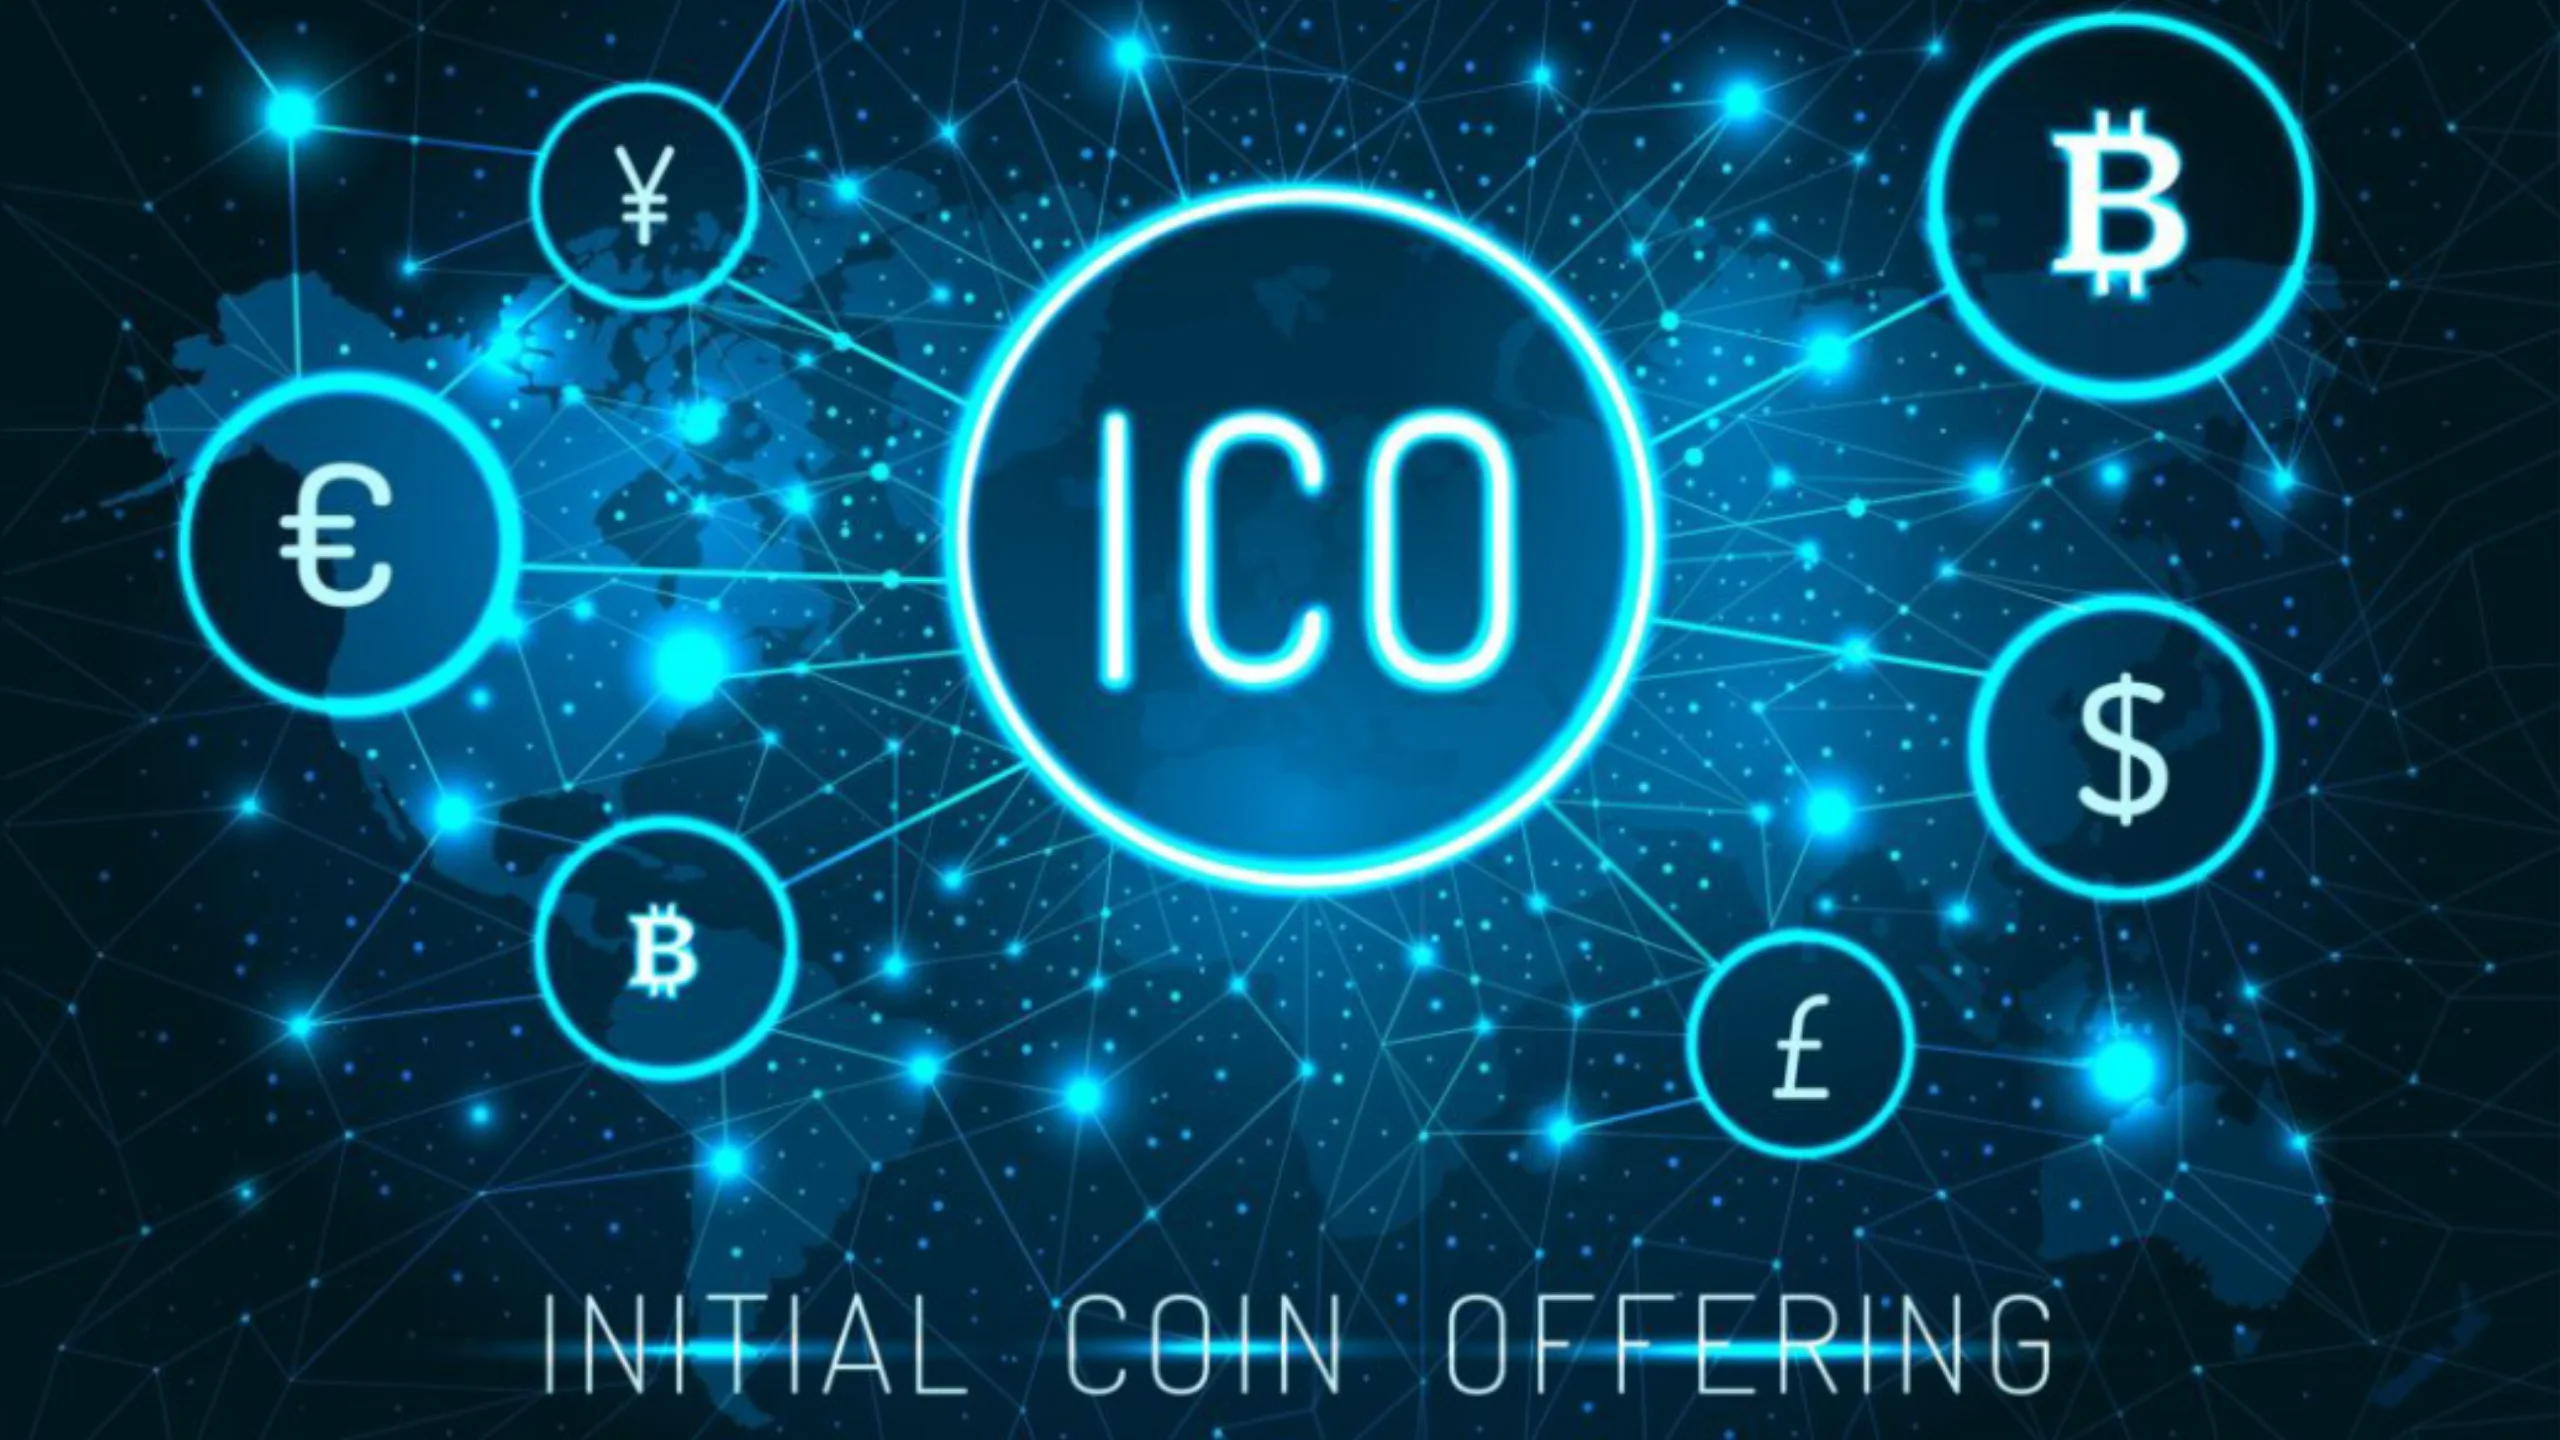 ICOs and Funding: ICOs are not a surefire way to fund any blockchain project; success depends on factors like project credibility, market conditions, and regulatory compliance.